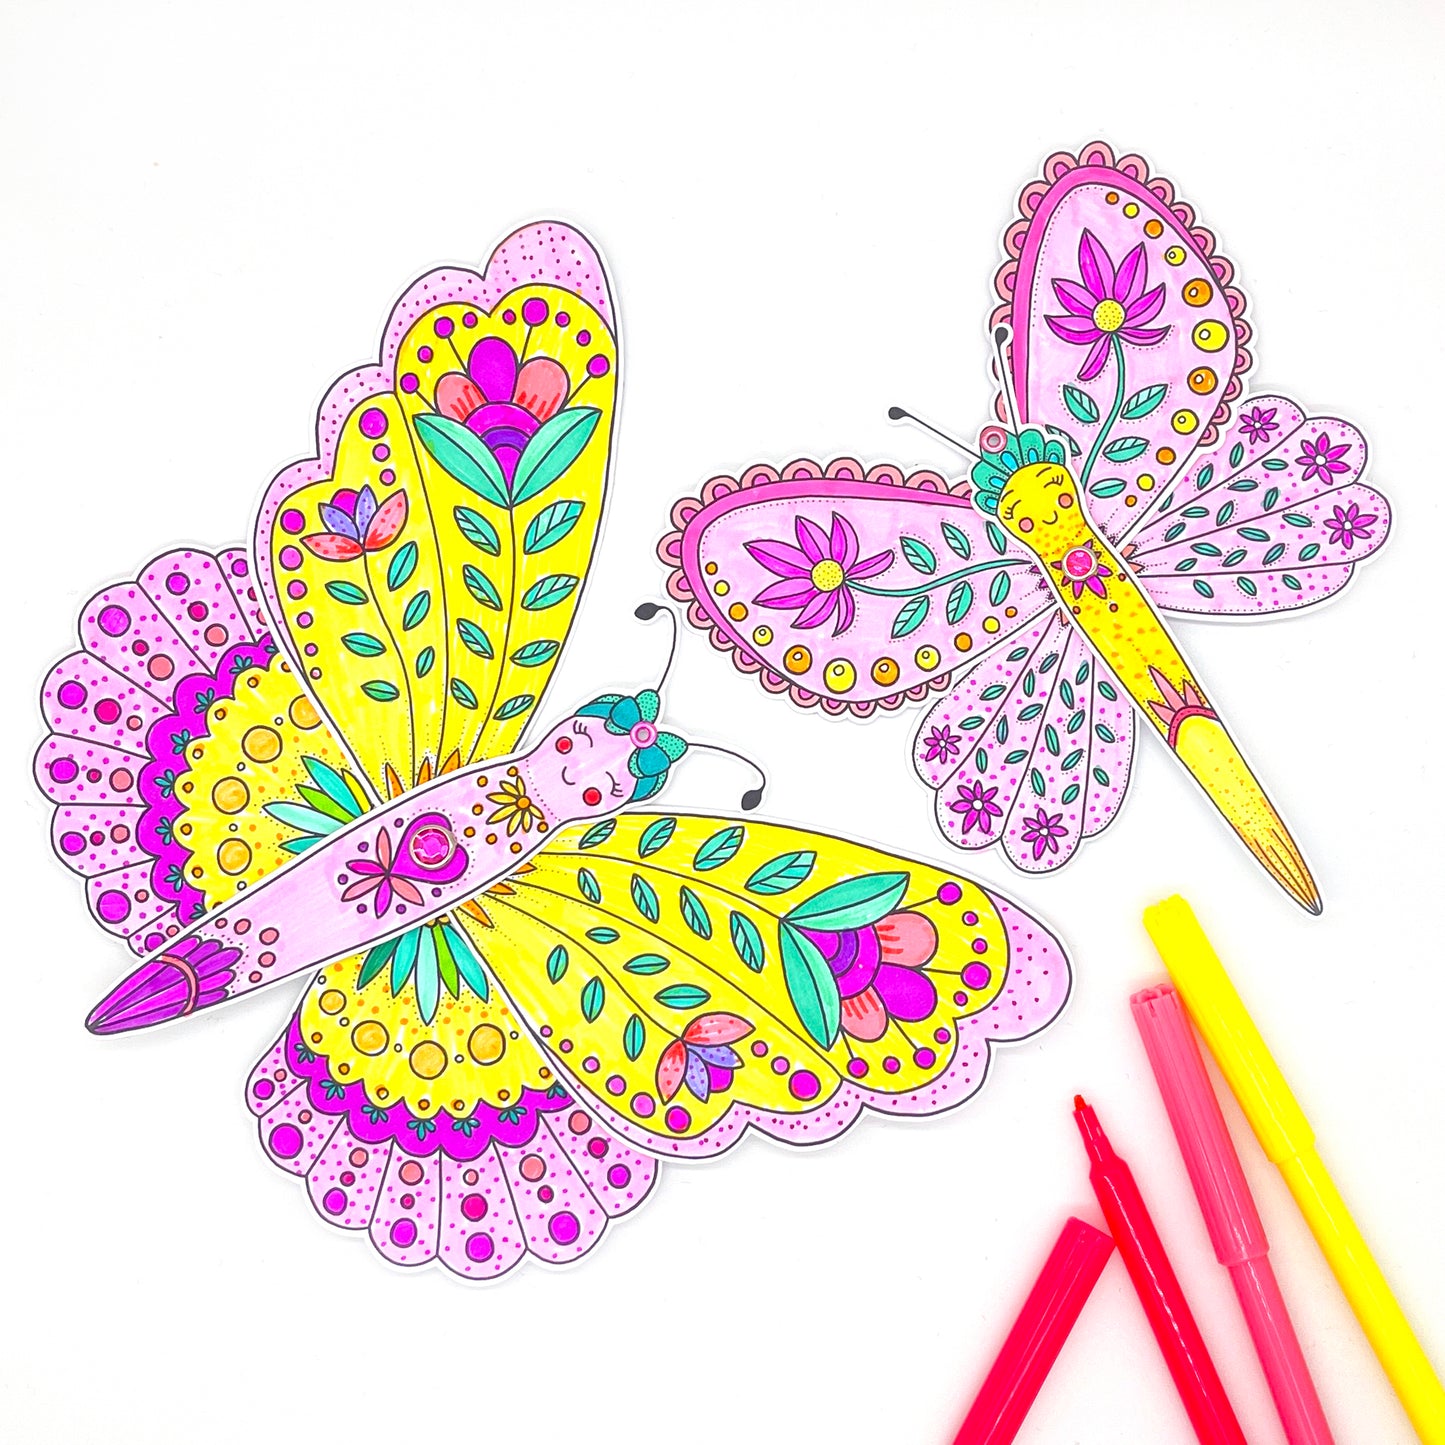 Dragonfly colouring Craft Kit - Loubiblu